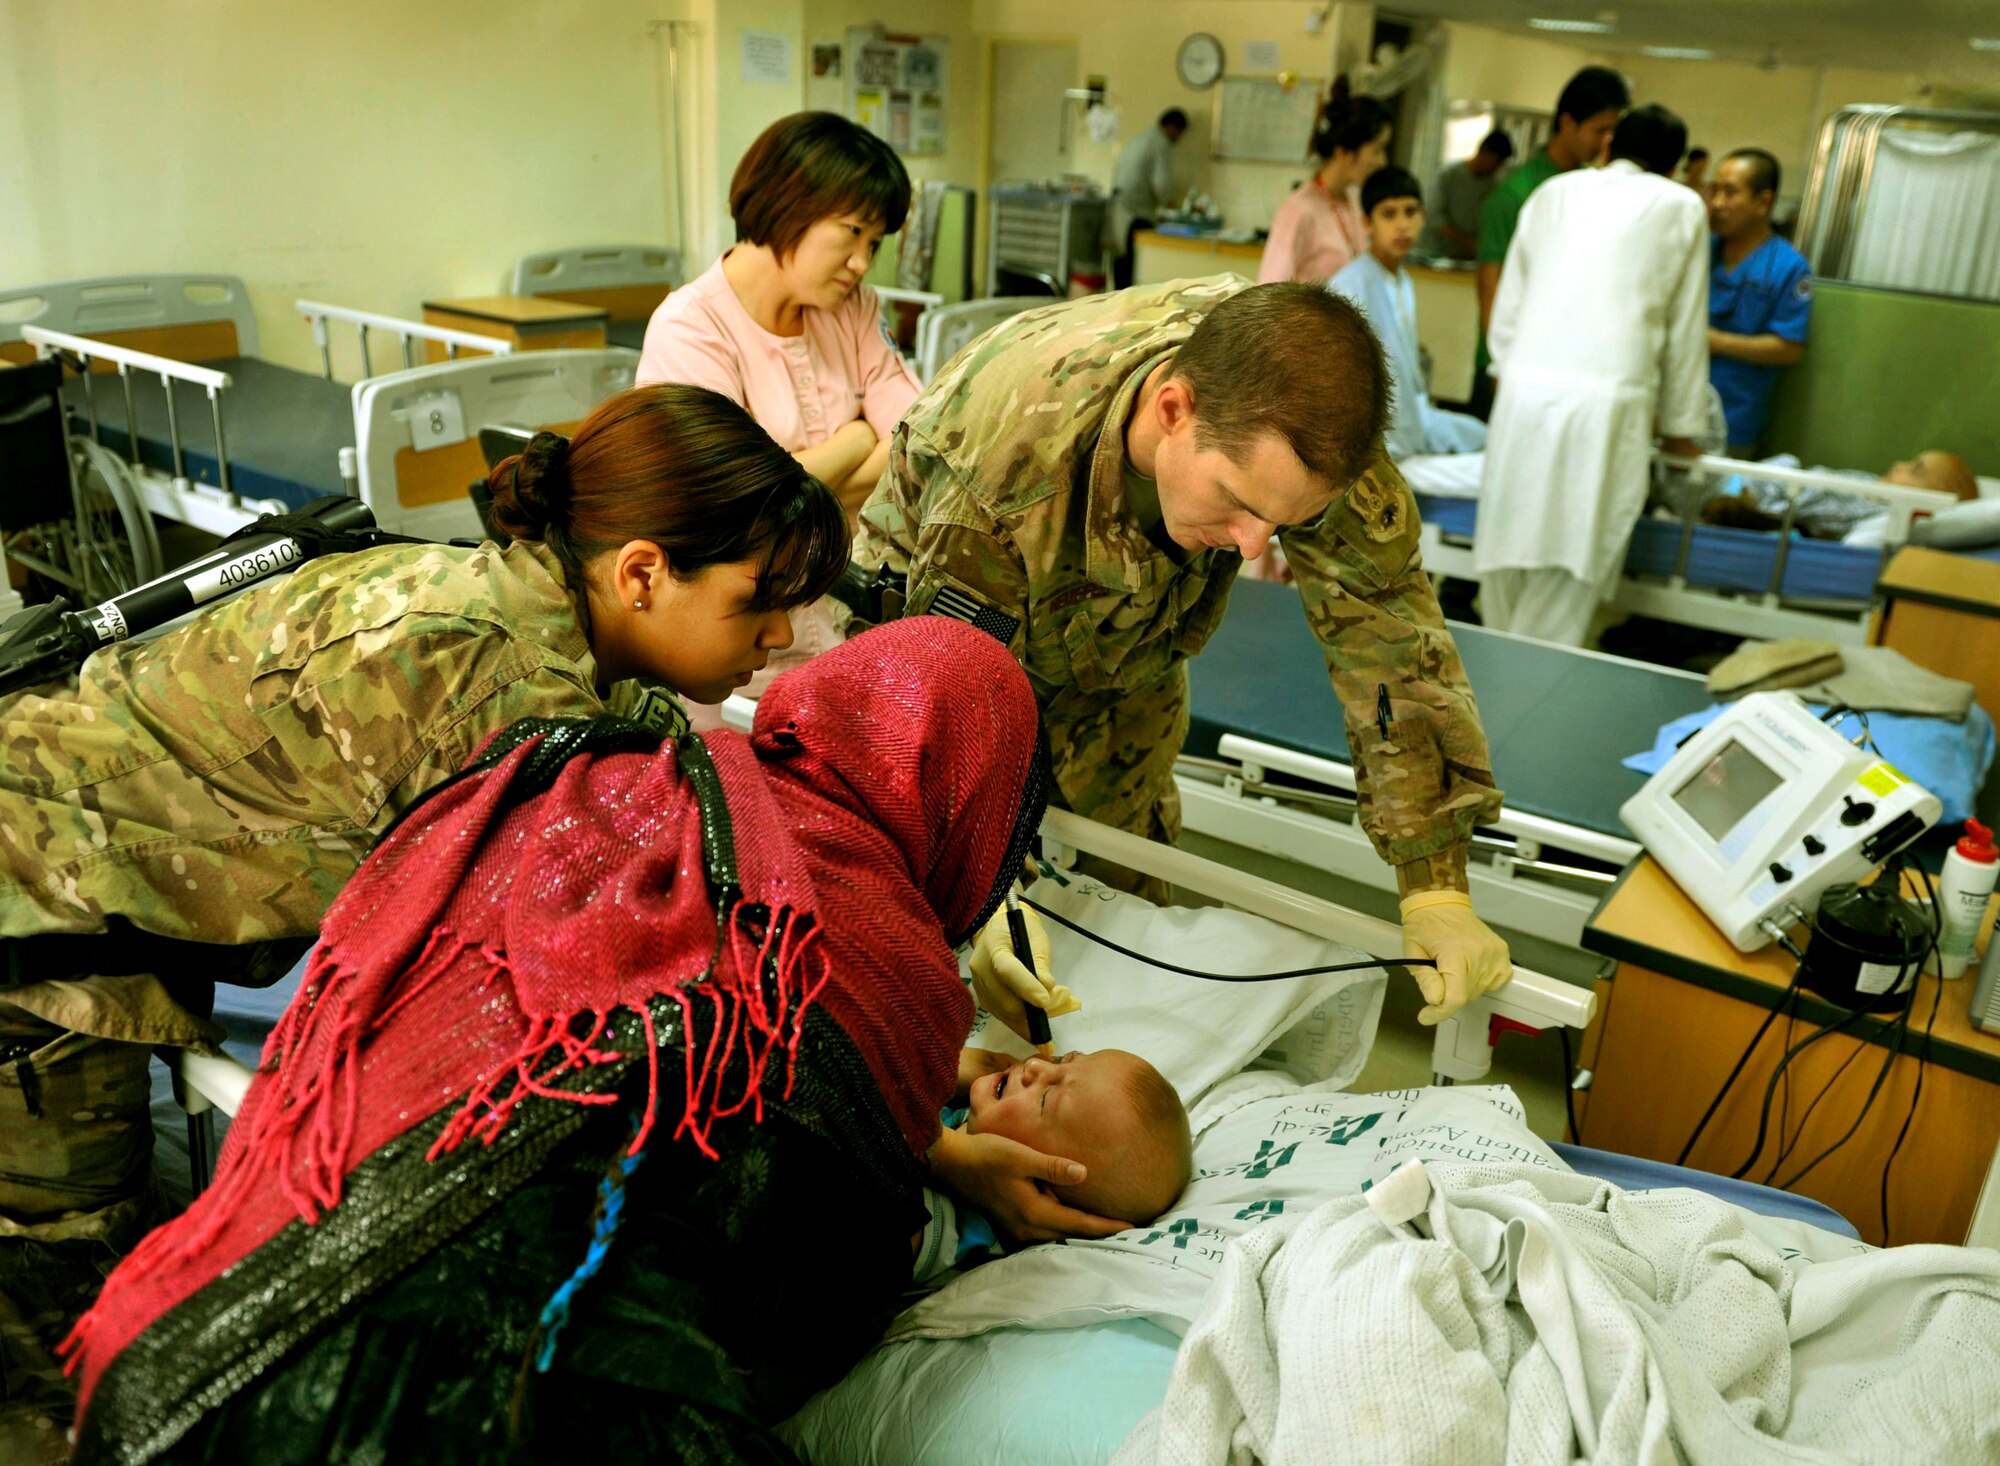 Maj. Marcus Neuffer, 455th Expeditionary Medical Group ophthalmologist, and his technician, Airman 1st Class Chellbie Gonzales, conduct an ultrasound on the left eye of a 12-month boy in the Korean hospital on Bagram Airfield, Afghanistan, July 7. Neuffer is currently the only doctor on Bagram who is qualified to operate on eyes. If a local patient comes in to one of the humanitarian hospitals, the Korean or Egyptian hospital, and is need of an eye surgery, they are brought to the American hospital. According to Nueffer, a child’s eye sight stops developing at about eight. If corrective surgery can be performed before then, with glasses, children should be able to regain enough vision to perform daily tasks. Both Maj Neuffer and A1C Gonzales are deployed from Keesler Air Force Base, Miss.  (U.S. Air Force photo/ Staff Sgt. Stephenie Wade)